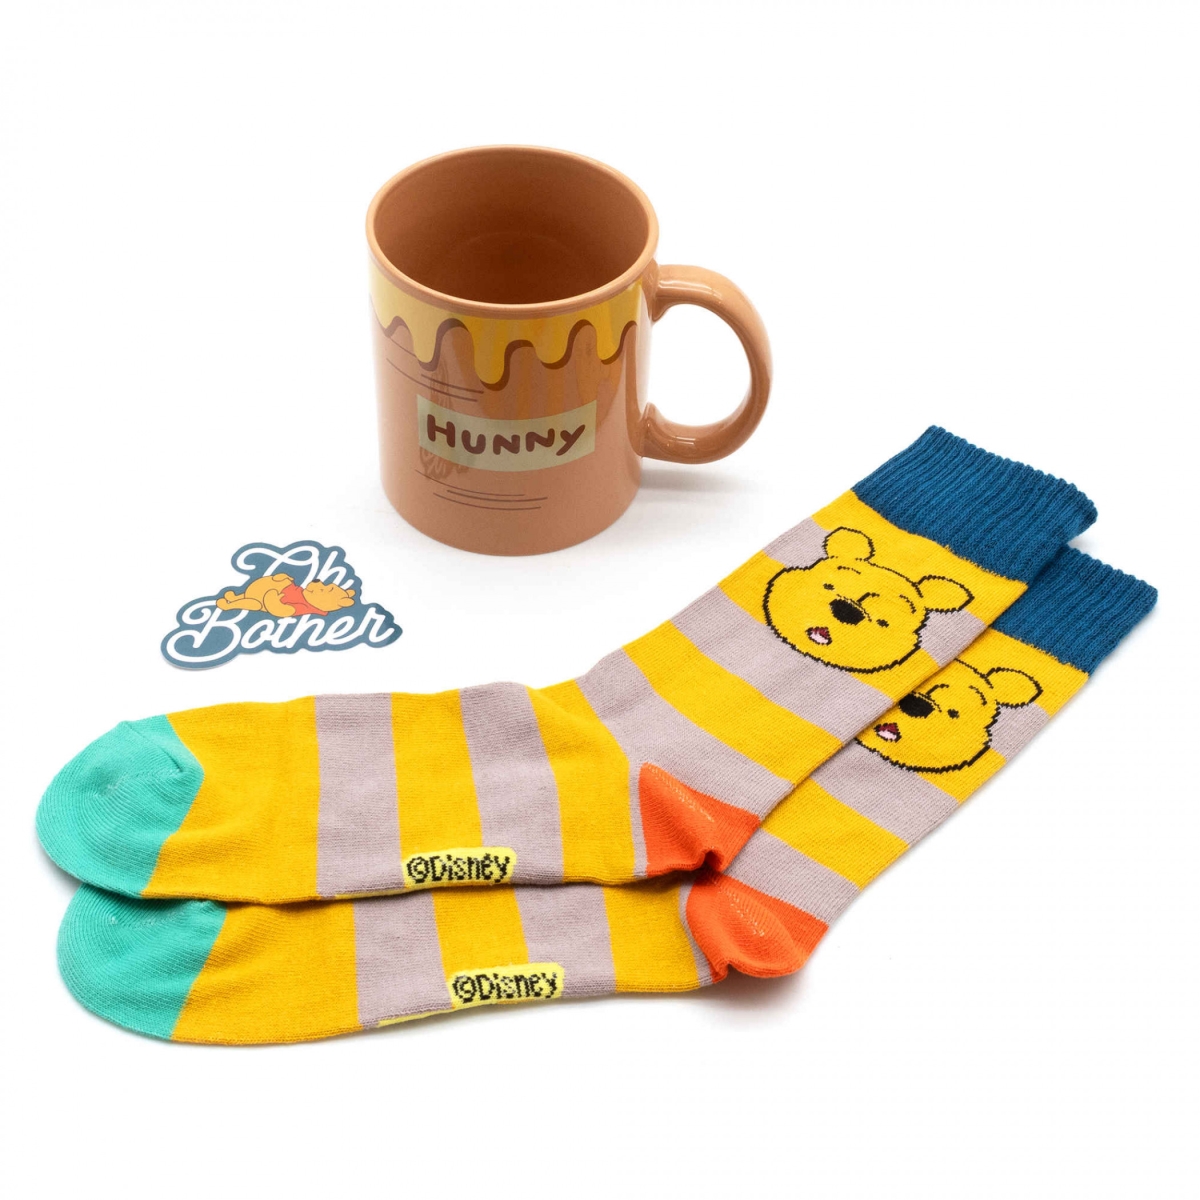 Picture of Winnie the Pooh 866384 Winnie the Pooh Sock in a Mug Gift Set with Sticker - 3 Piece